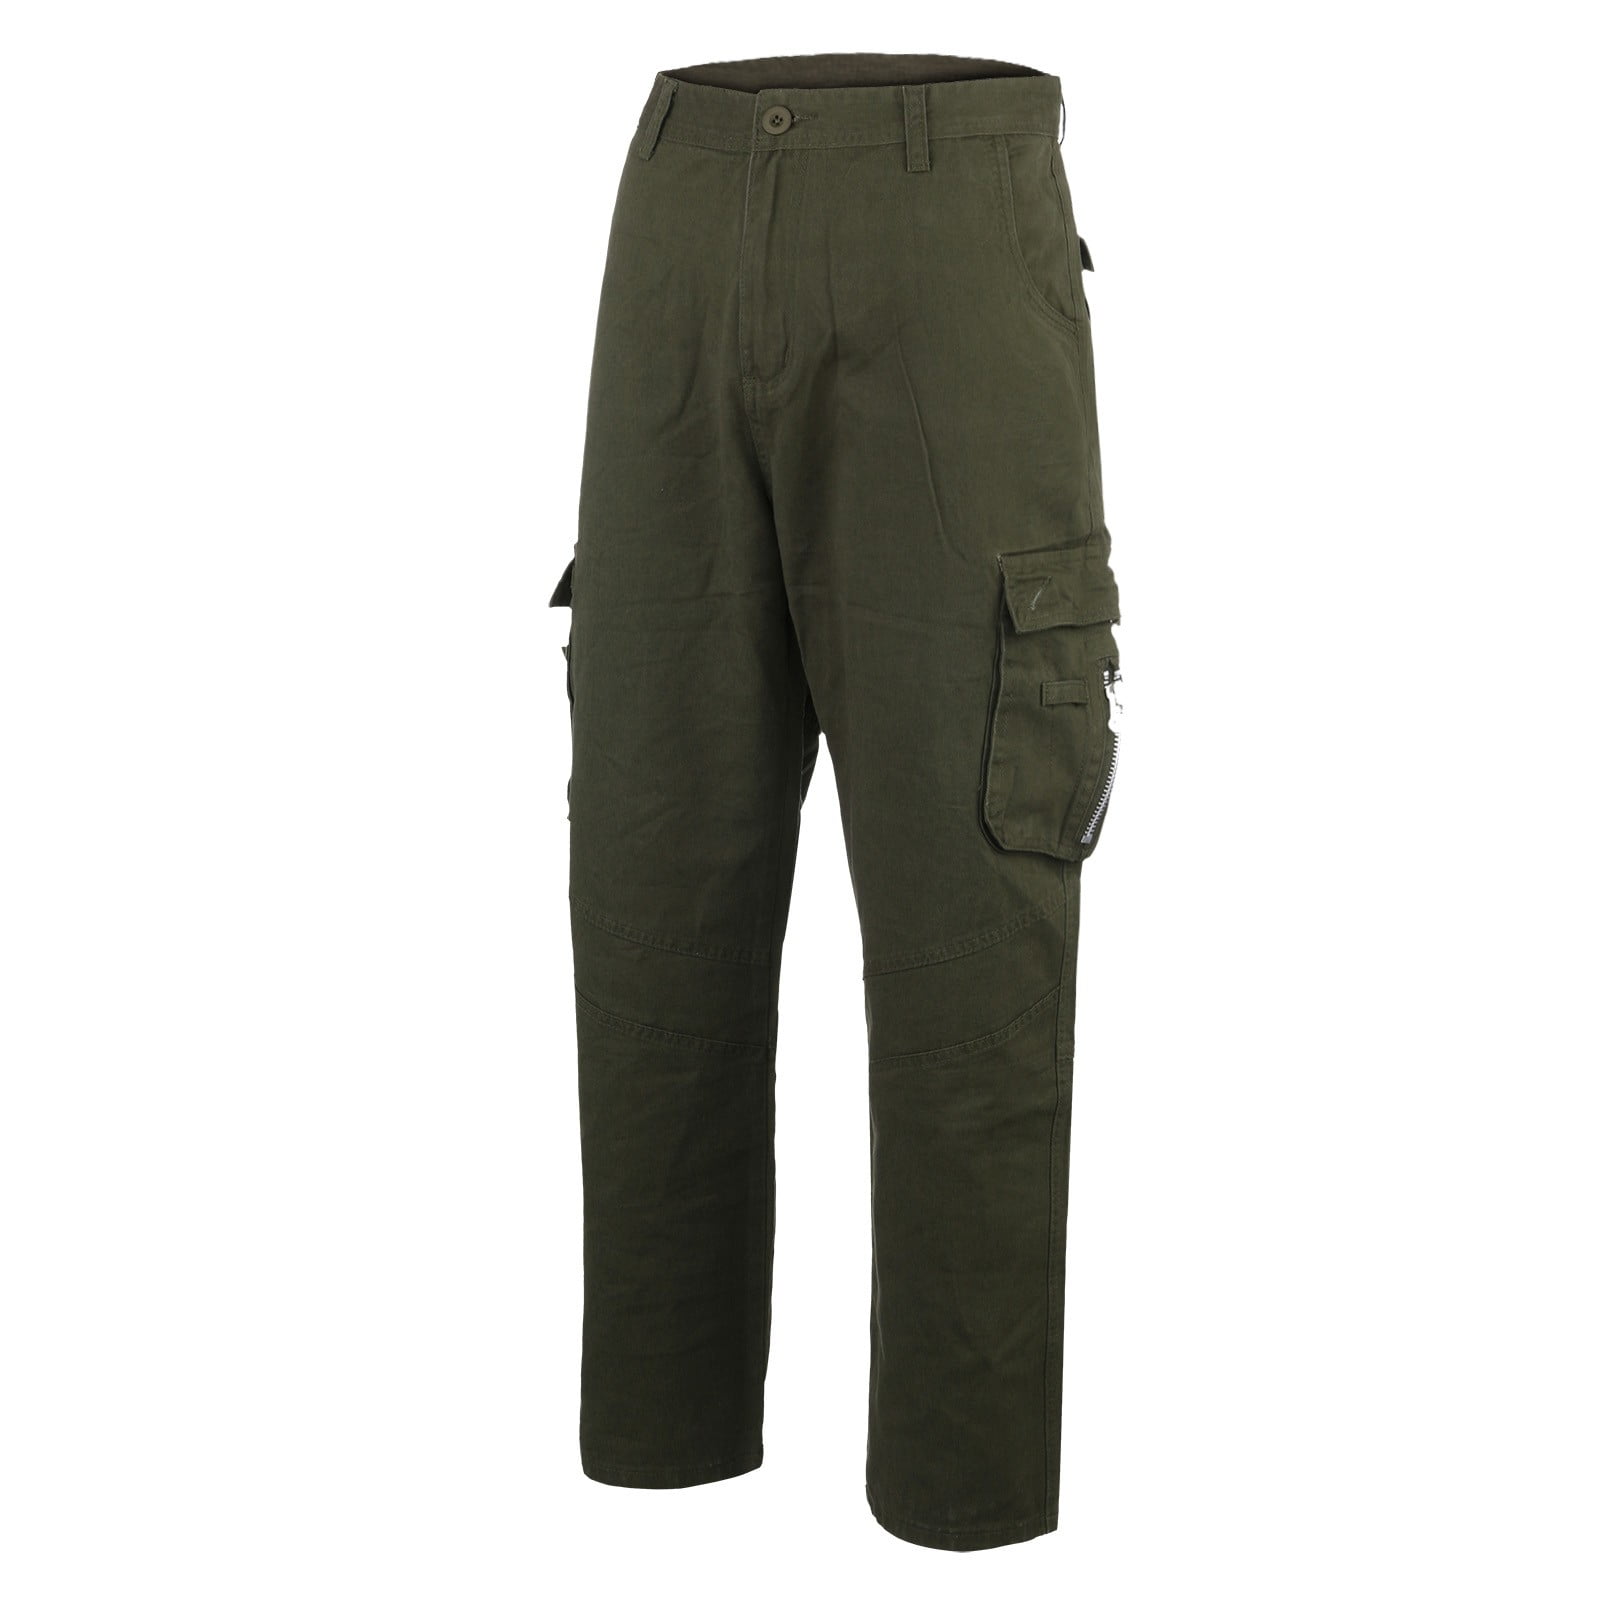 Summer Green Cargo Pants Men's New Fashion Casual Outdoors Solid Work Trousers  Multi-pocket Long 